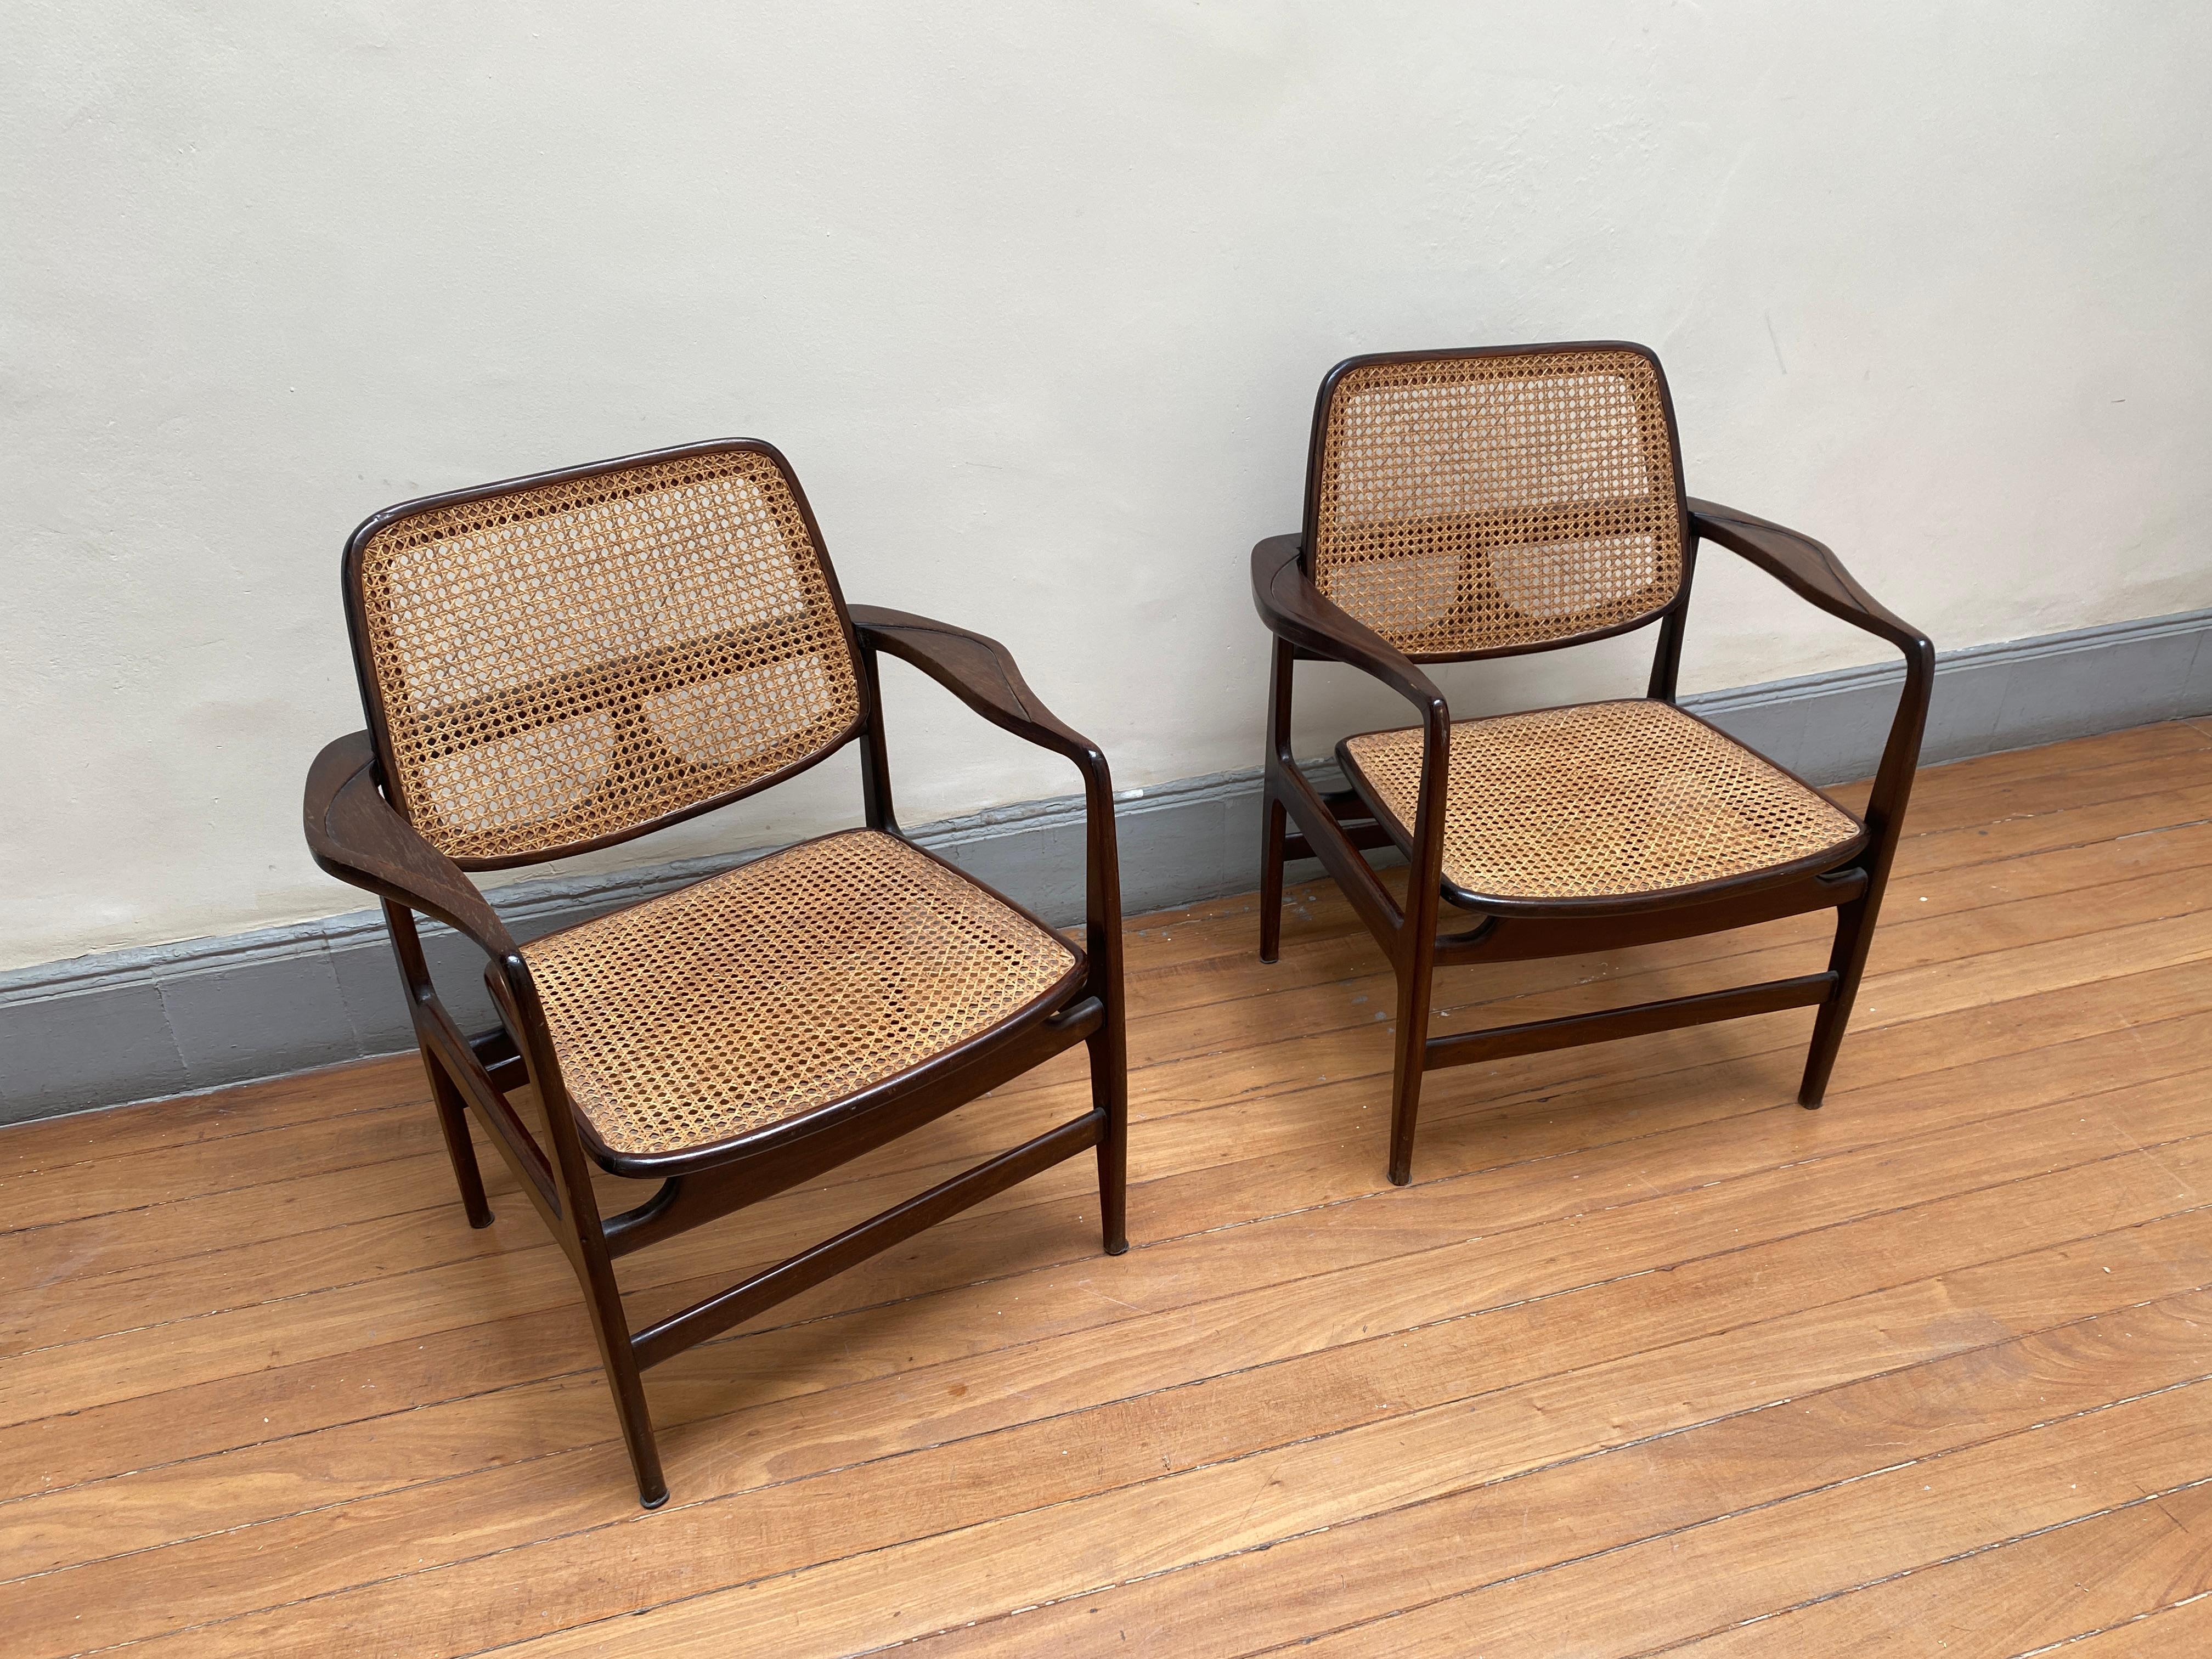 Set of Two Mid-Century Modern Oscar Armchairs by Sergio Rodrigues, Brazil, 1956 In Good Condition For Sale In Deerfield Beach, FL